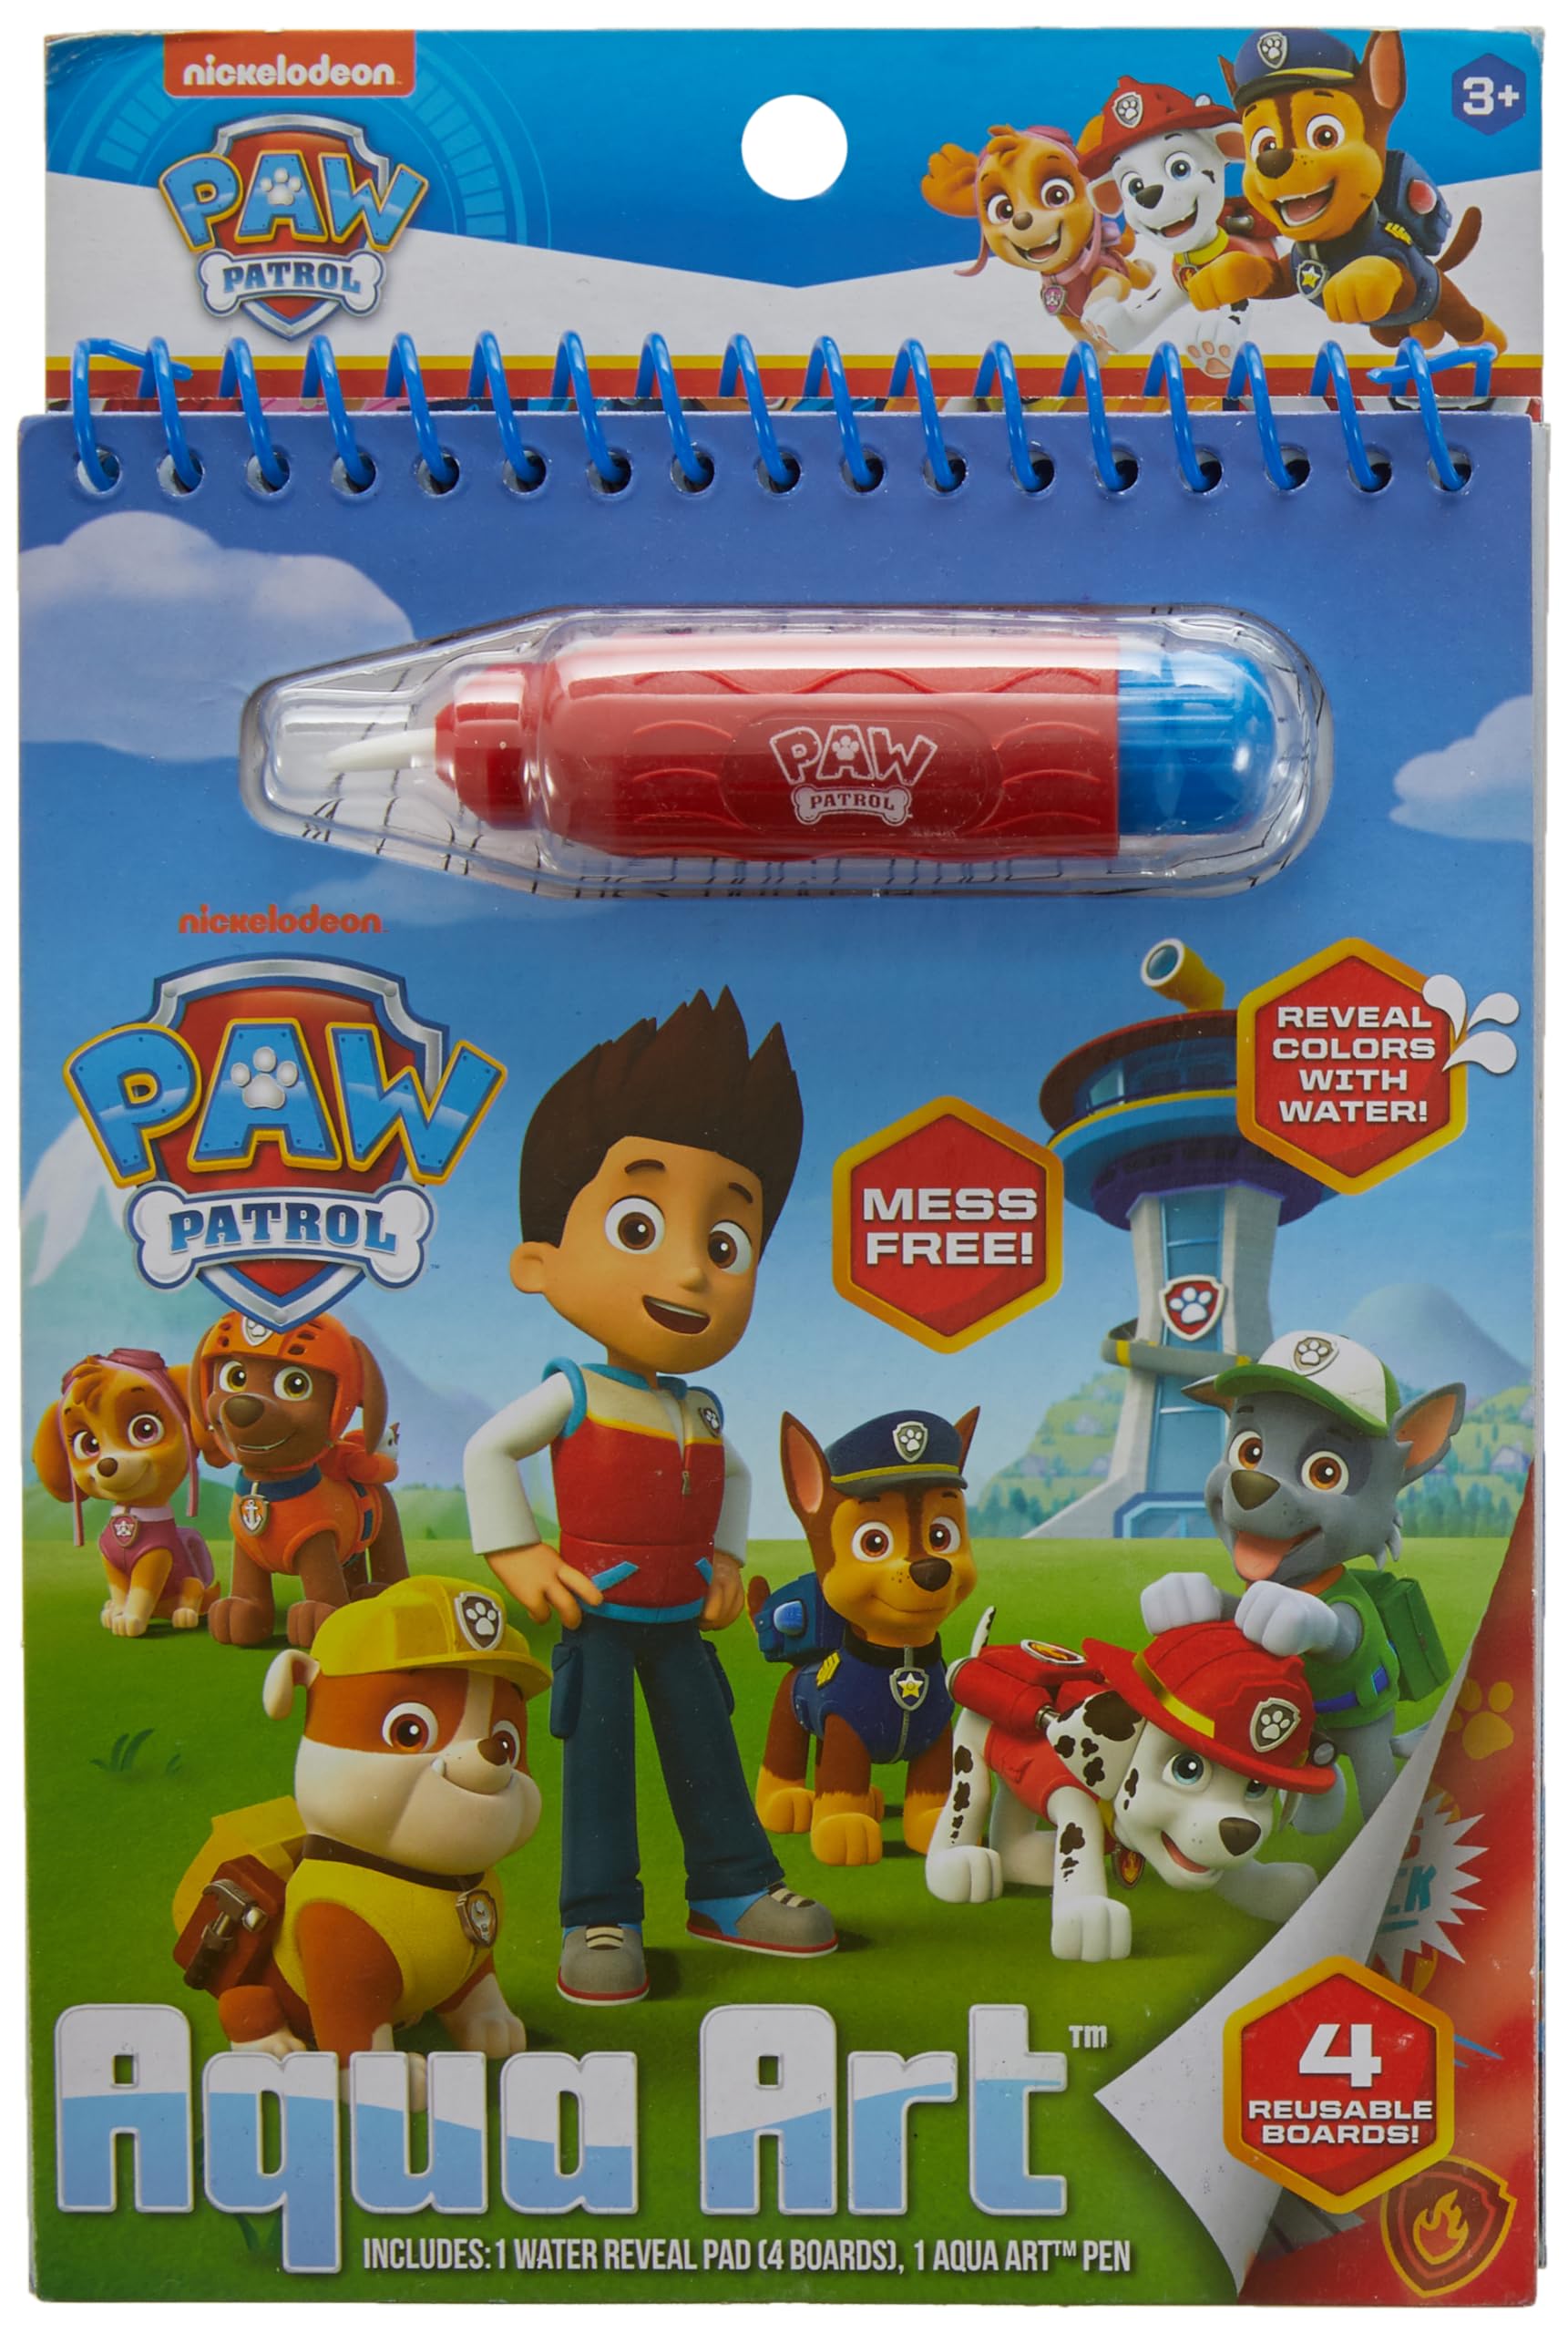 Paw Patrol Aqua Art, Includes 4 Reusable Pages of Water Art & Water Pen, Color with Water Book, Water Reveal Activity Book, Paint with Water Books, Water Doodle Book, Reusable No-Mess Art Book